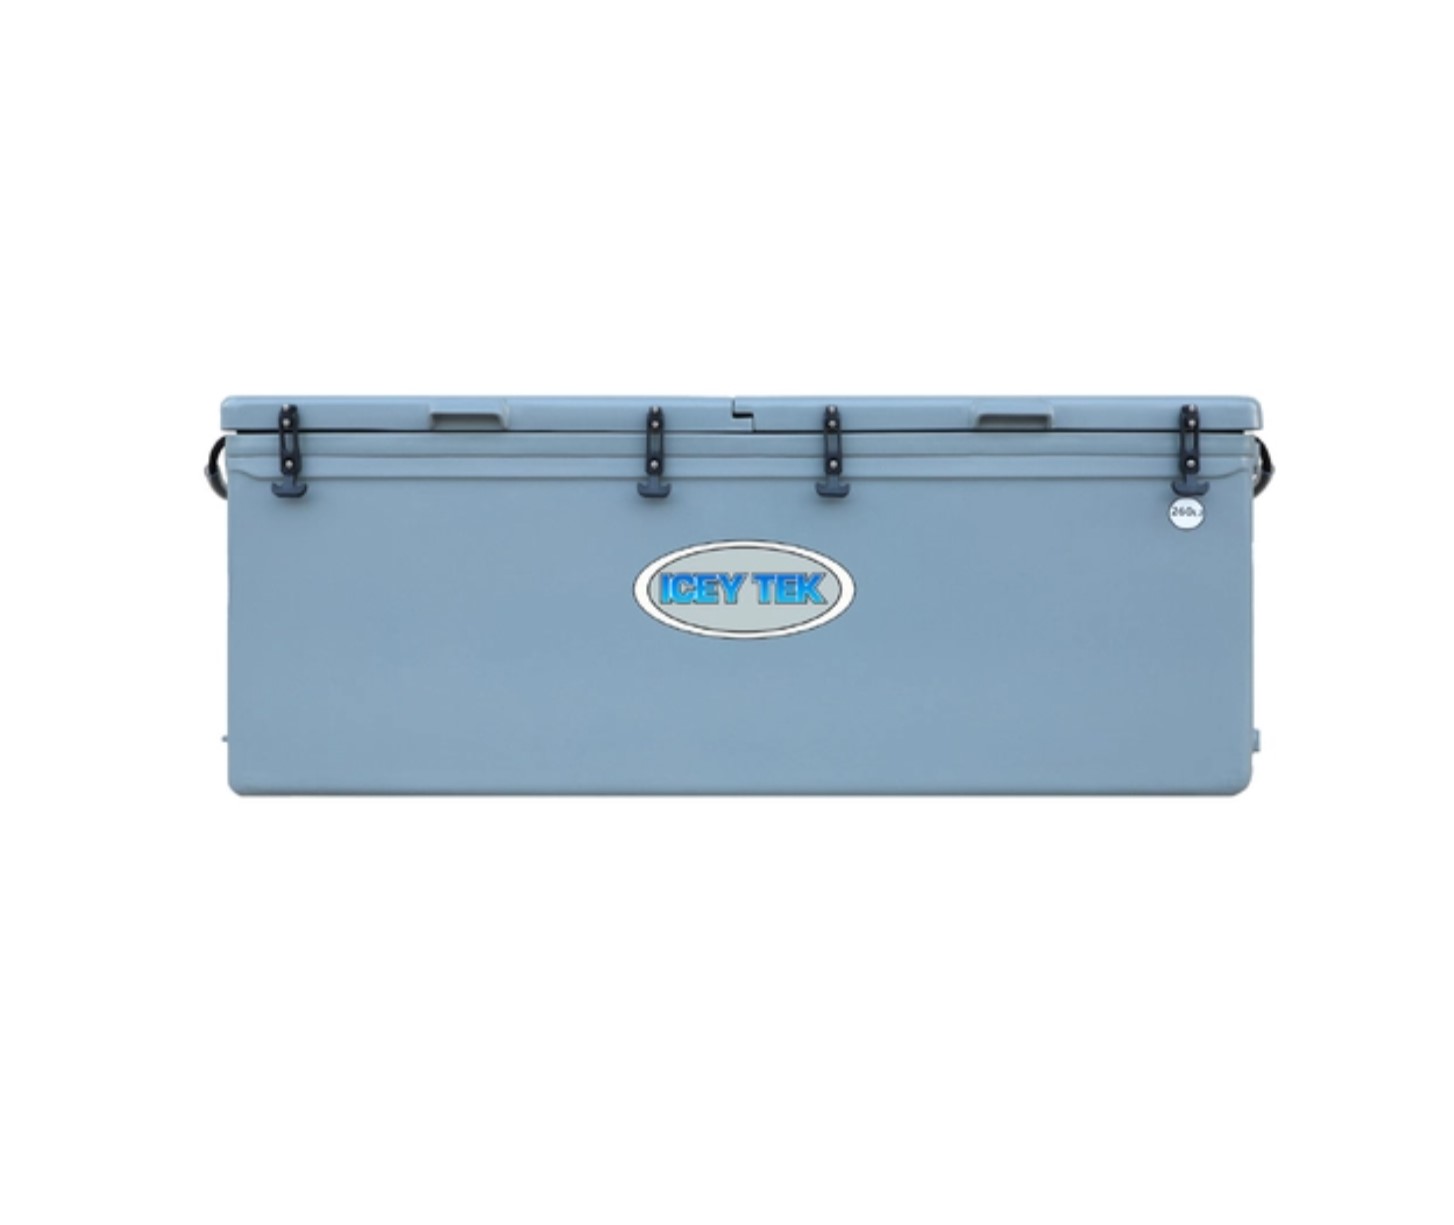 Icey Tek 260L Split Shop The Box only) Lid Gold (Available in-store - Long Coast Bait Ice Cooler/Esky